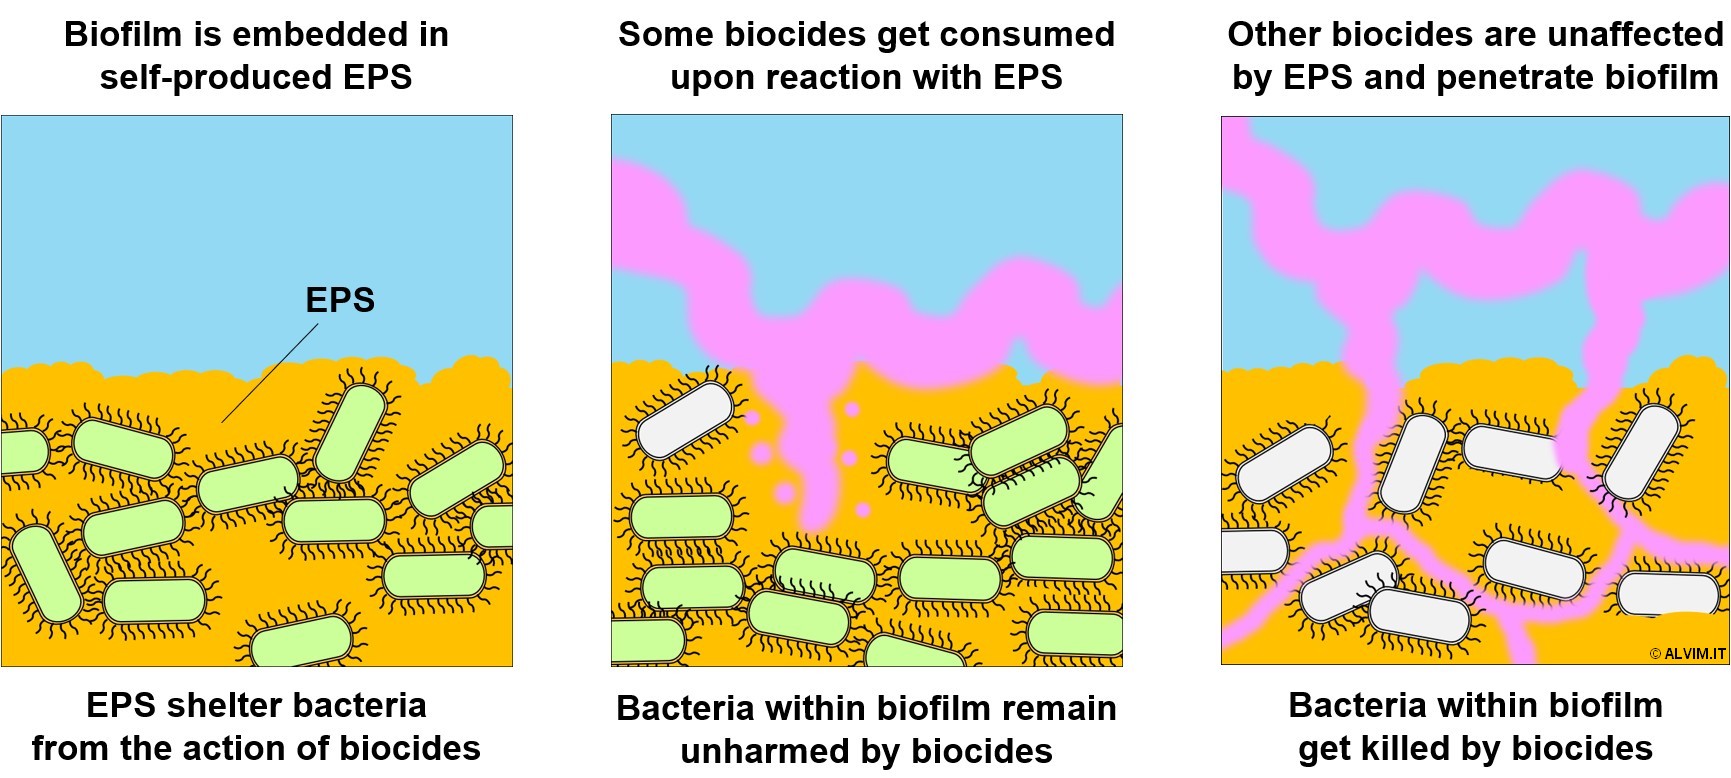 The biocide ability to penetrate biofilm is inversely proportional to its reactivity toward EPS